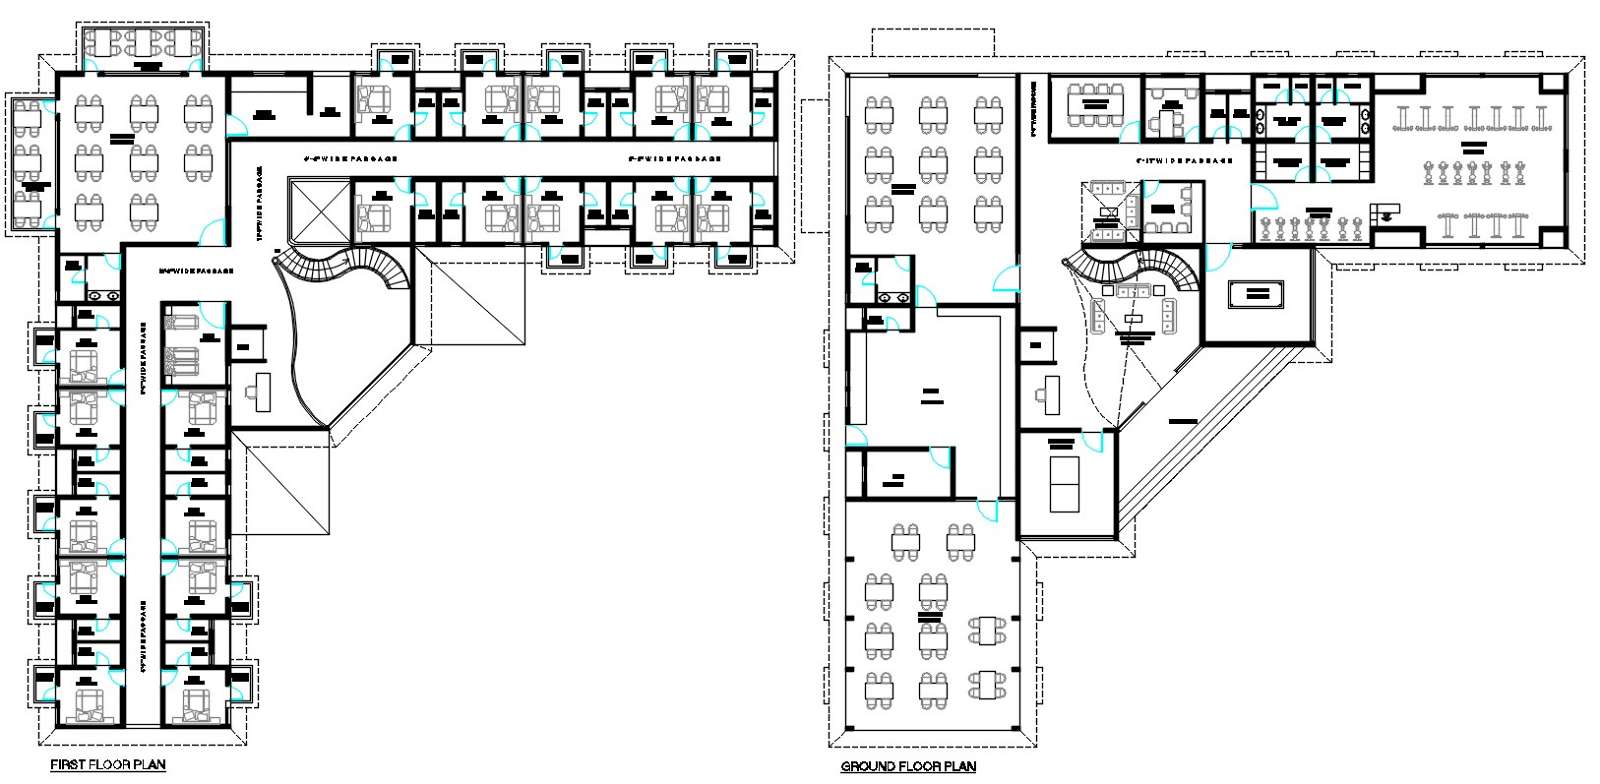 AutoCAD File Of Hotel Architecture Floor Plan CAD Drawing